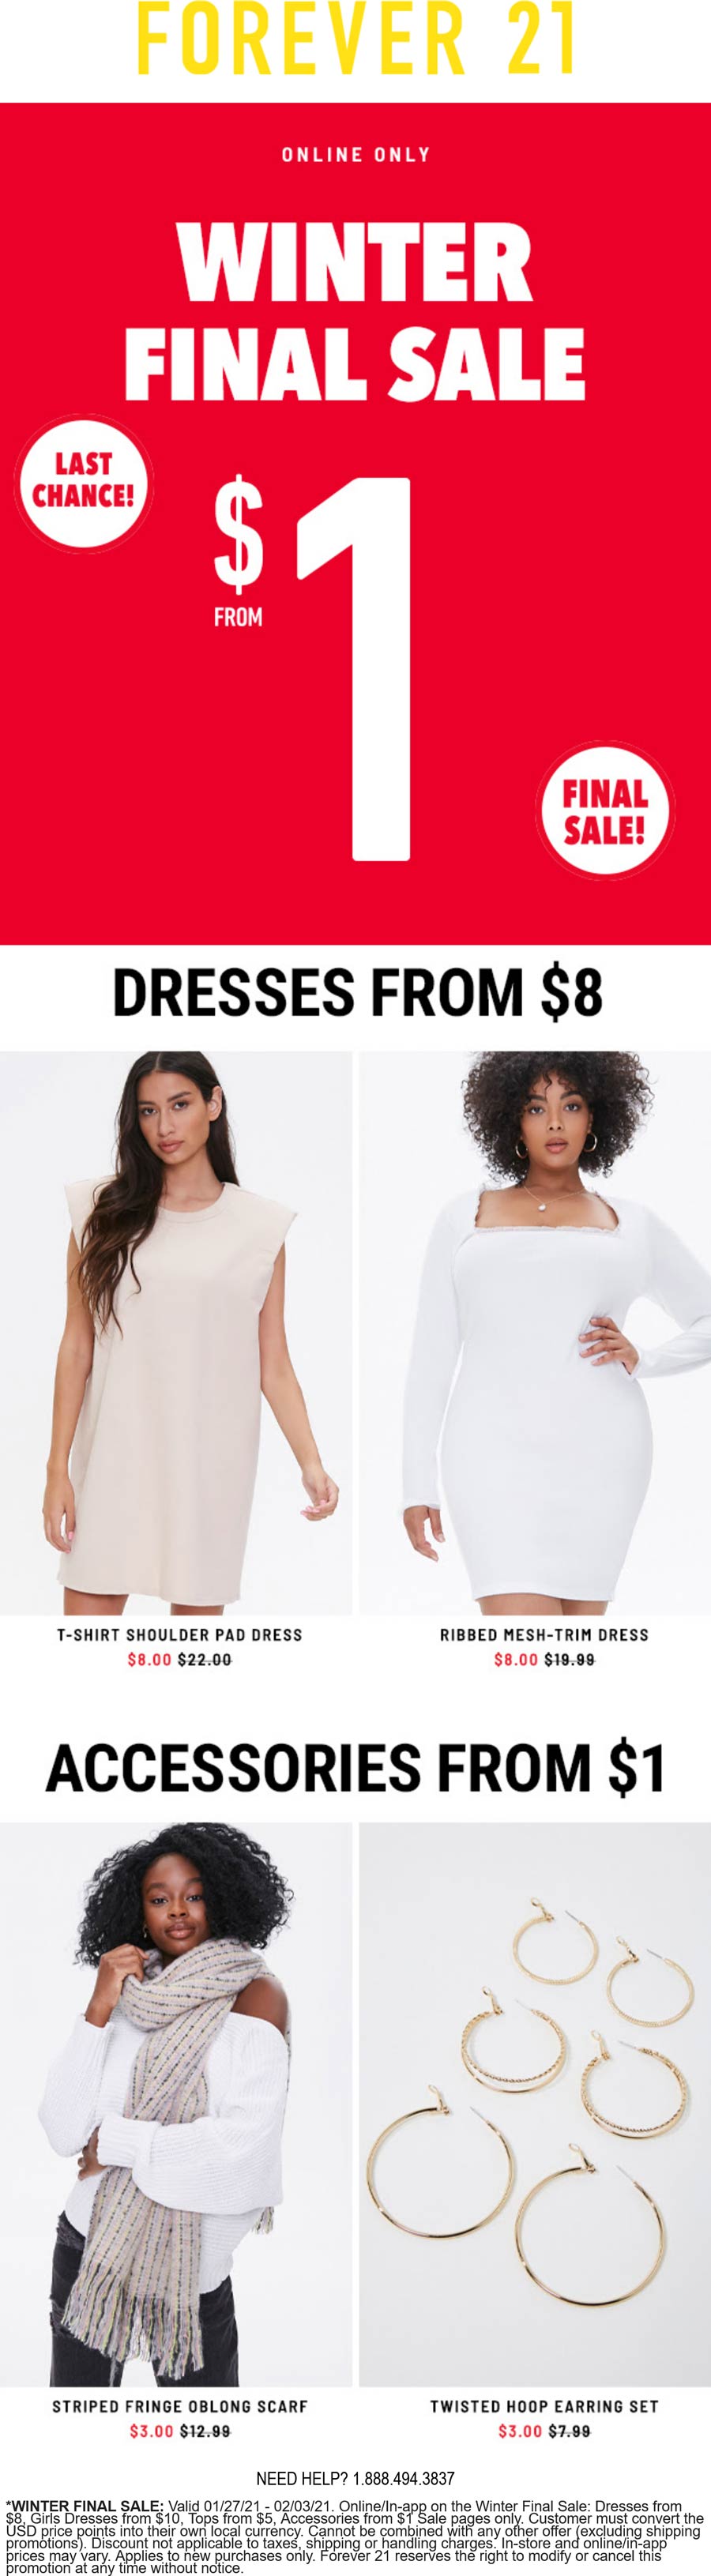 Forever 21 stores Coupon  $8 winter dresses, $5 tops & $1 accessories online at Forever 21 #forever21 